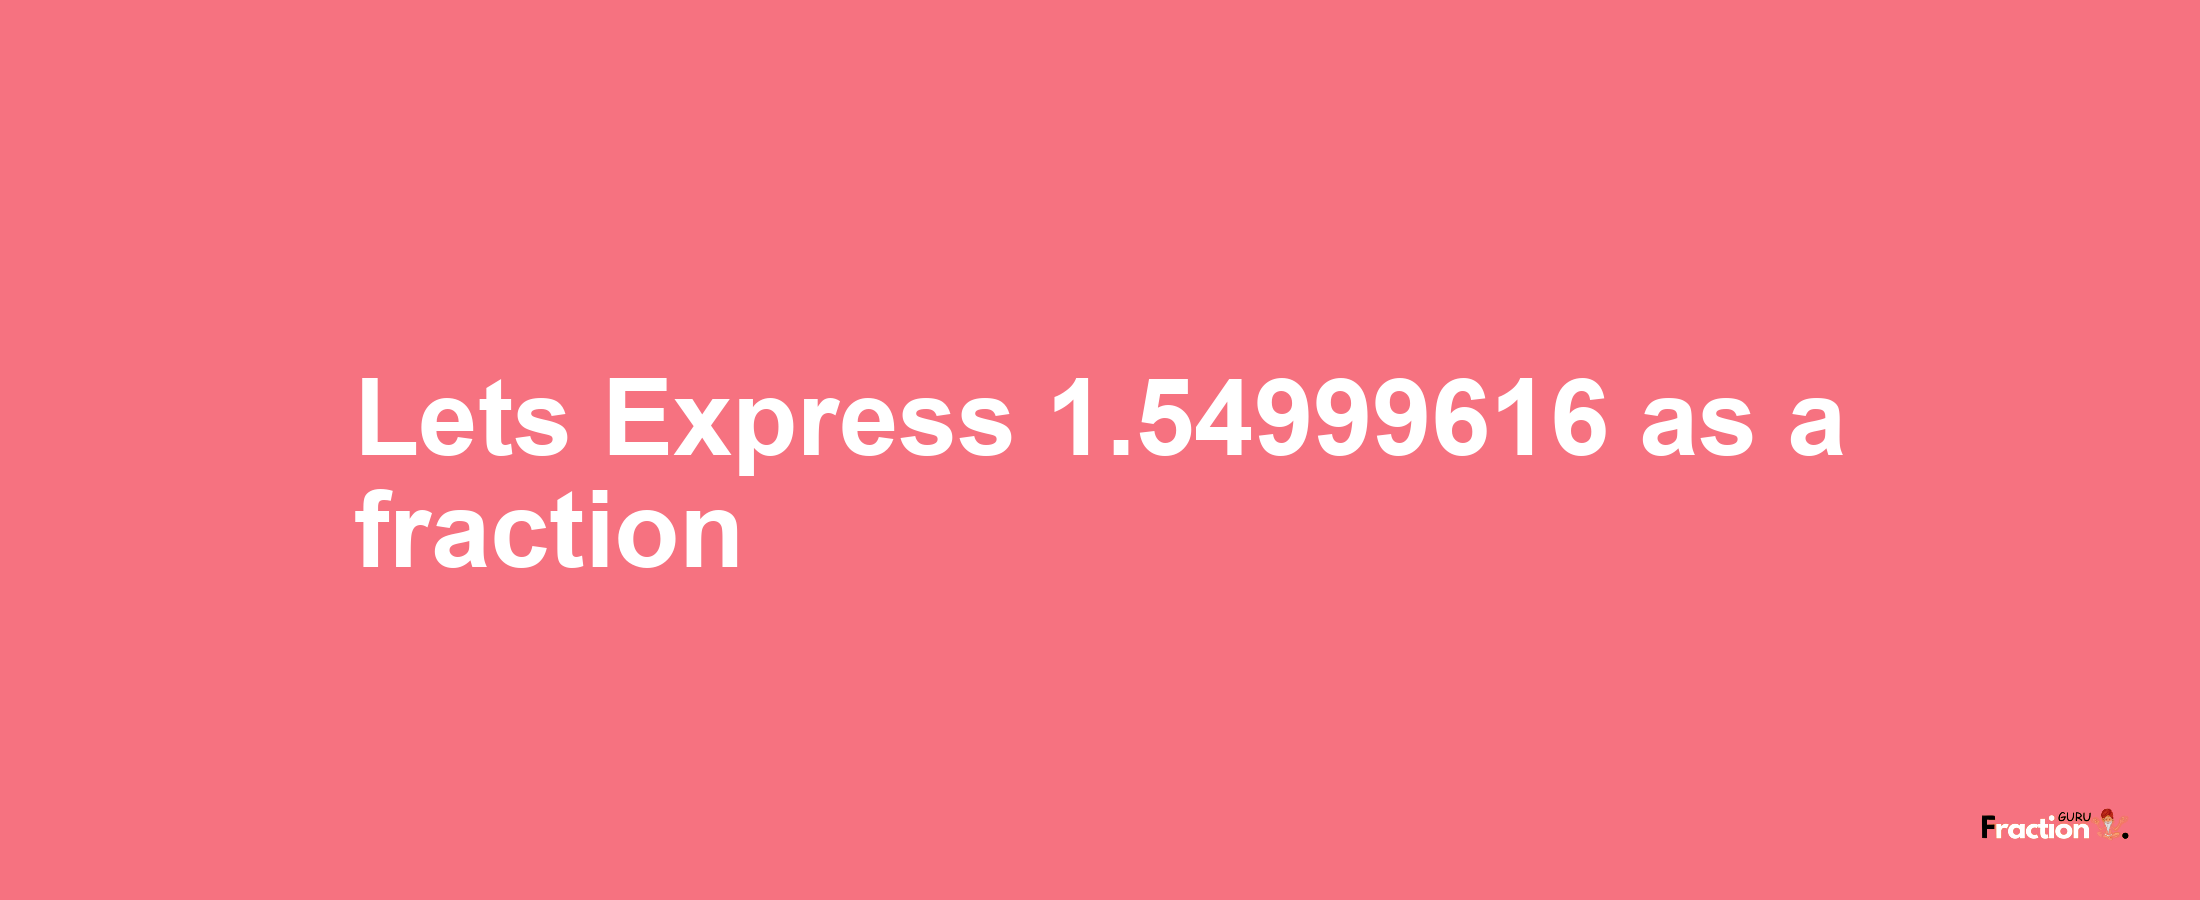 Lets Express 1.54999616 as afraction